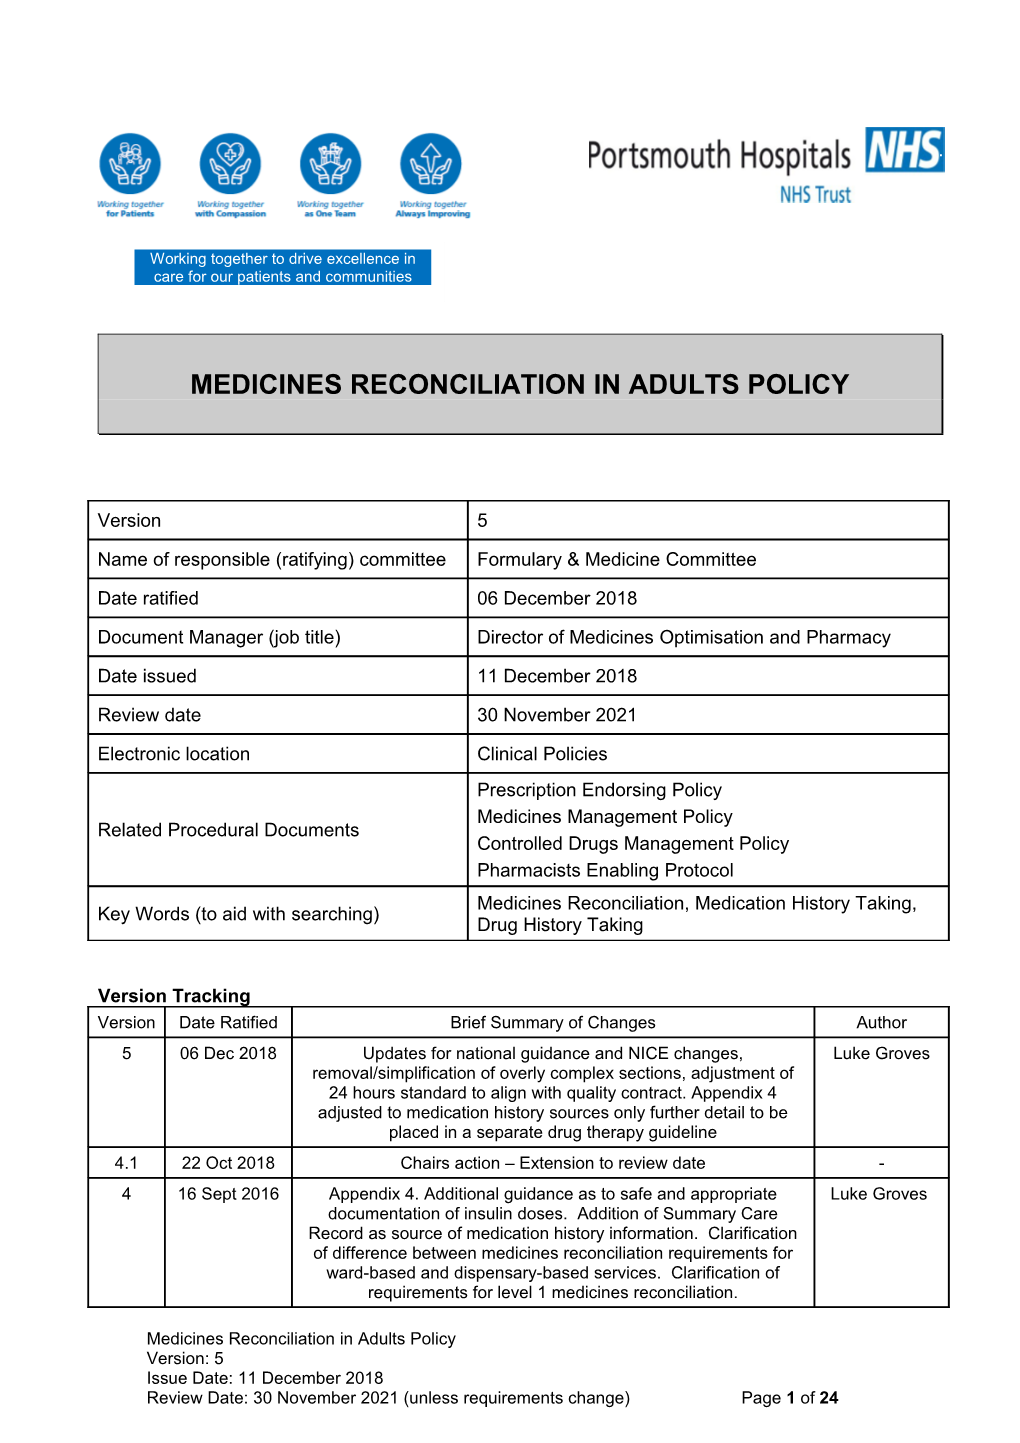 Medicines Reconciliation in Adults Policy